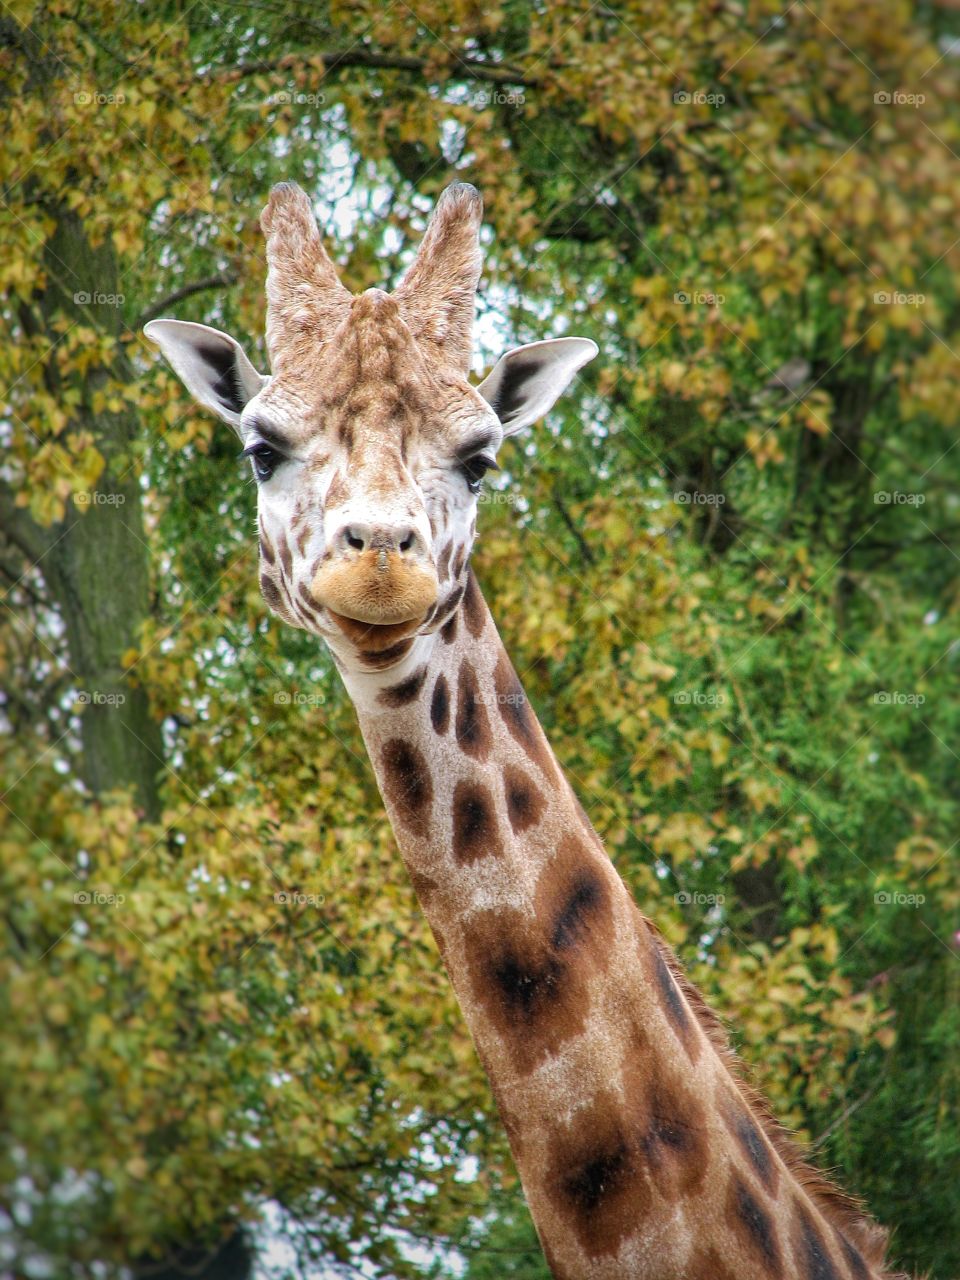 A head and shoulders and neck portrait of a curious giraffe looking straight at the camera with trees and foliage in the background.